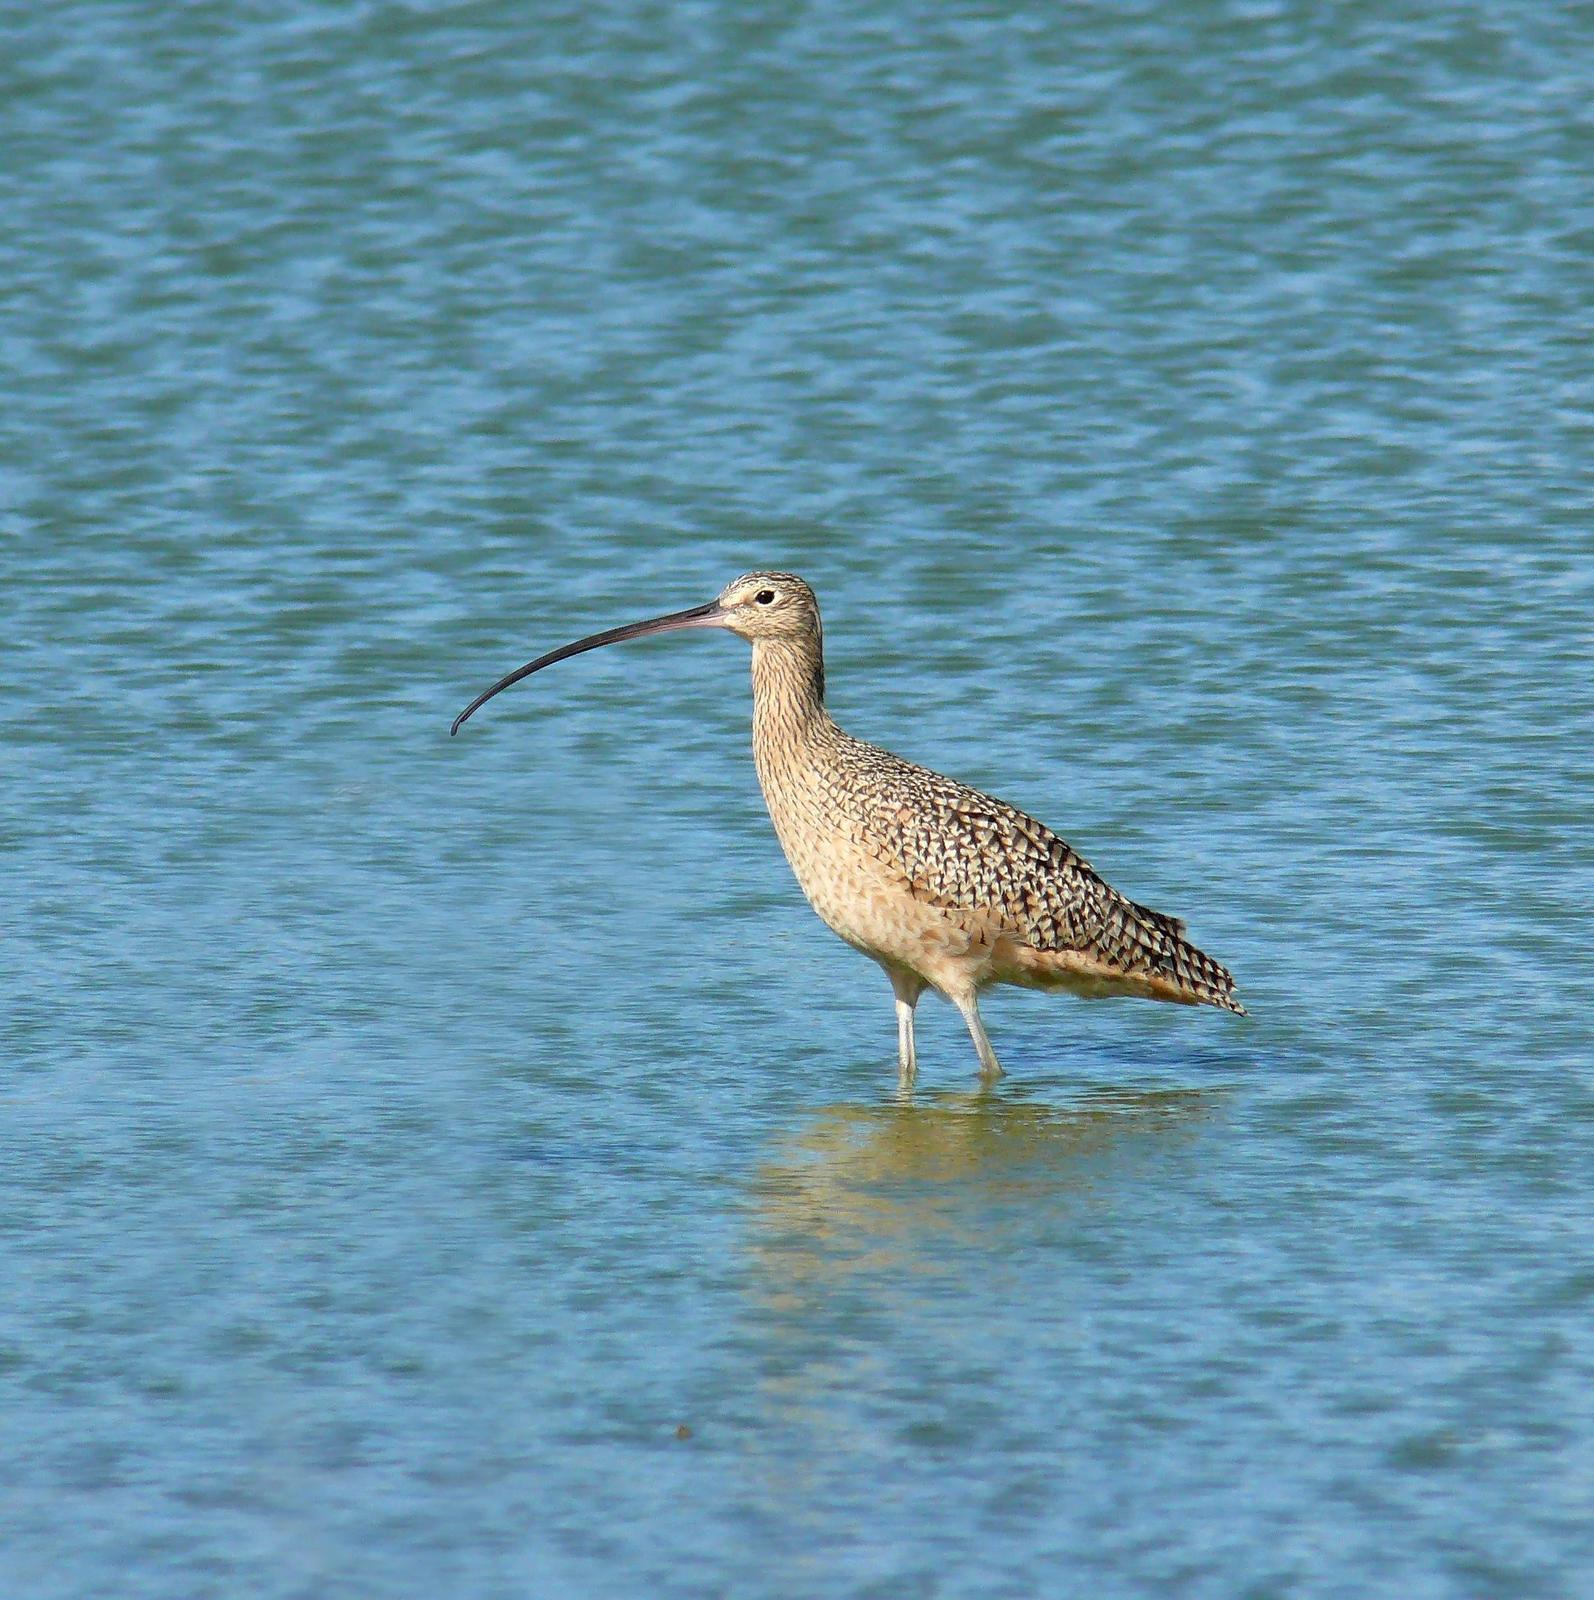 Long-billed Curlew Photo by Steven Mlodinow